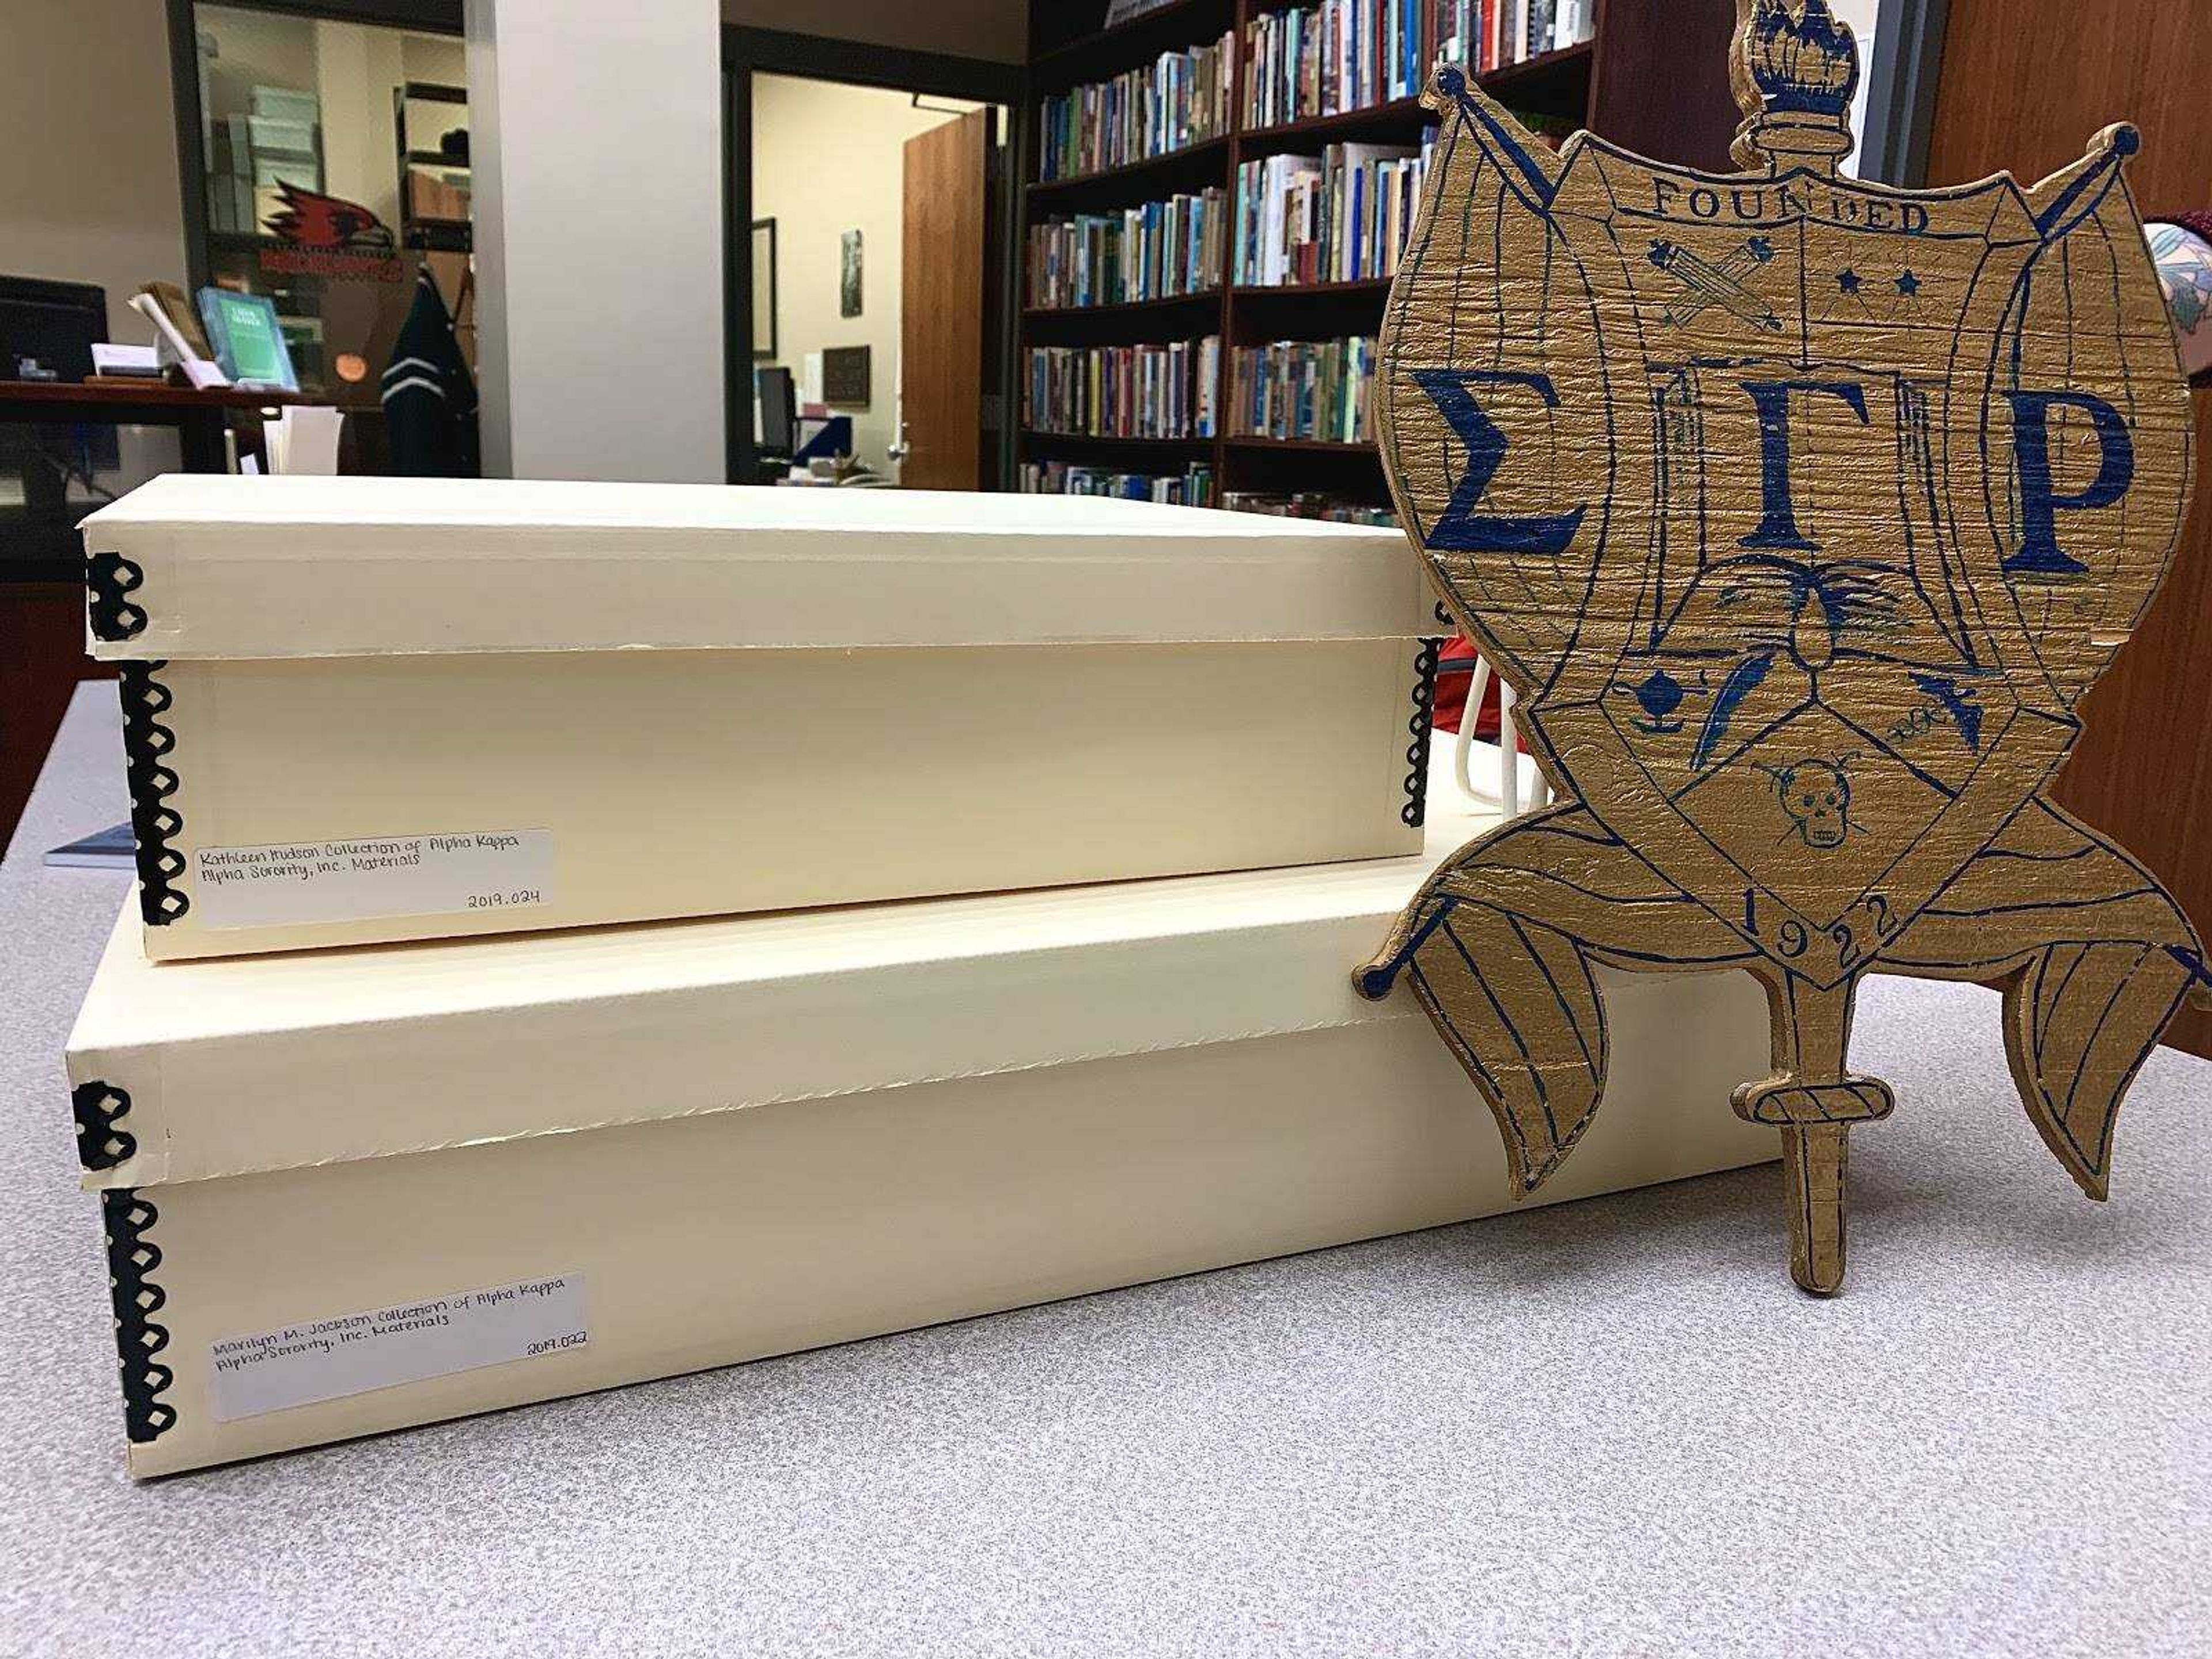 1922 Sigma Gamma Rho signage sits propped against donated African American greek memorabilia from Kathleen Hudson and Marilyn Jackson.